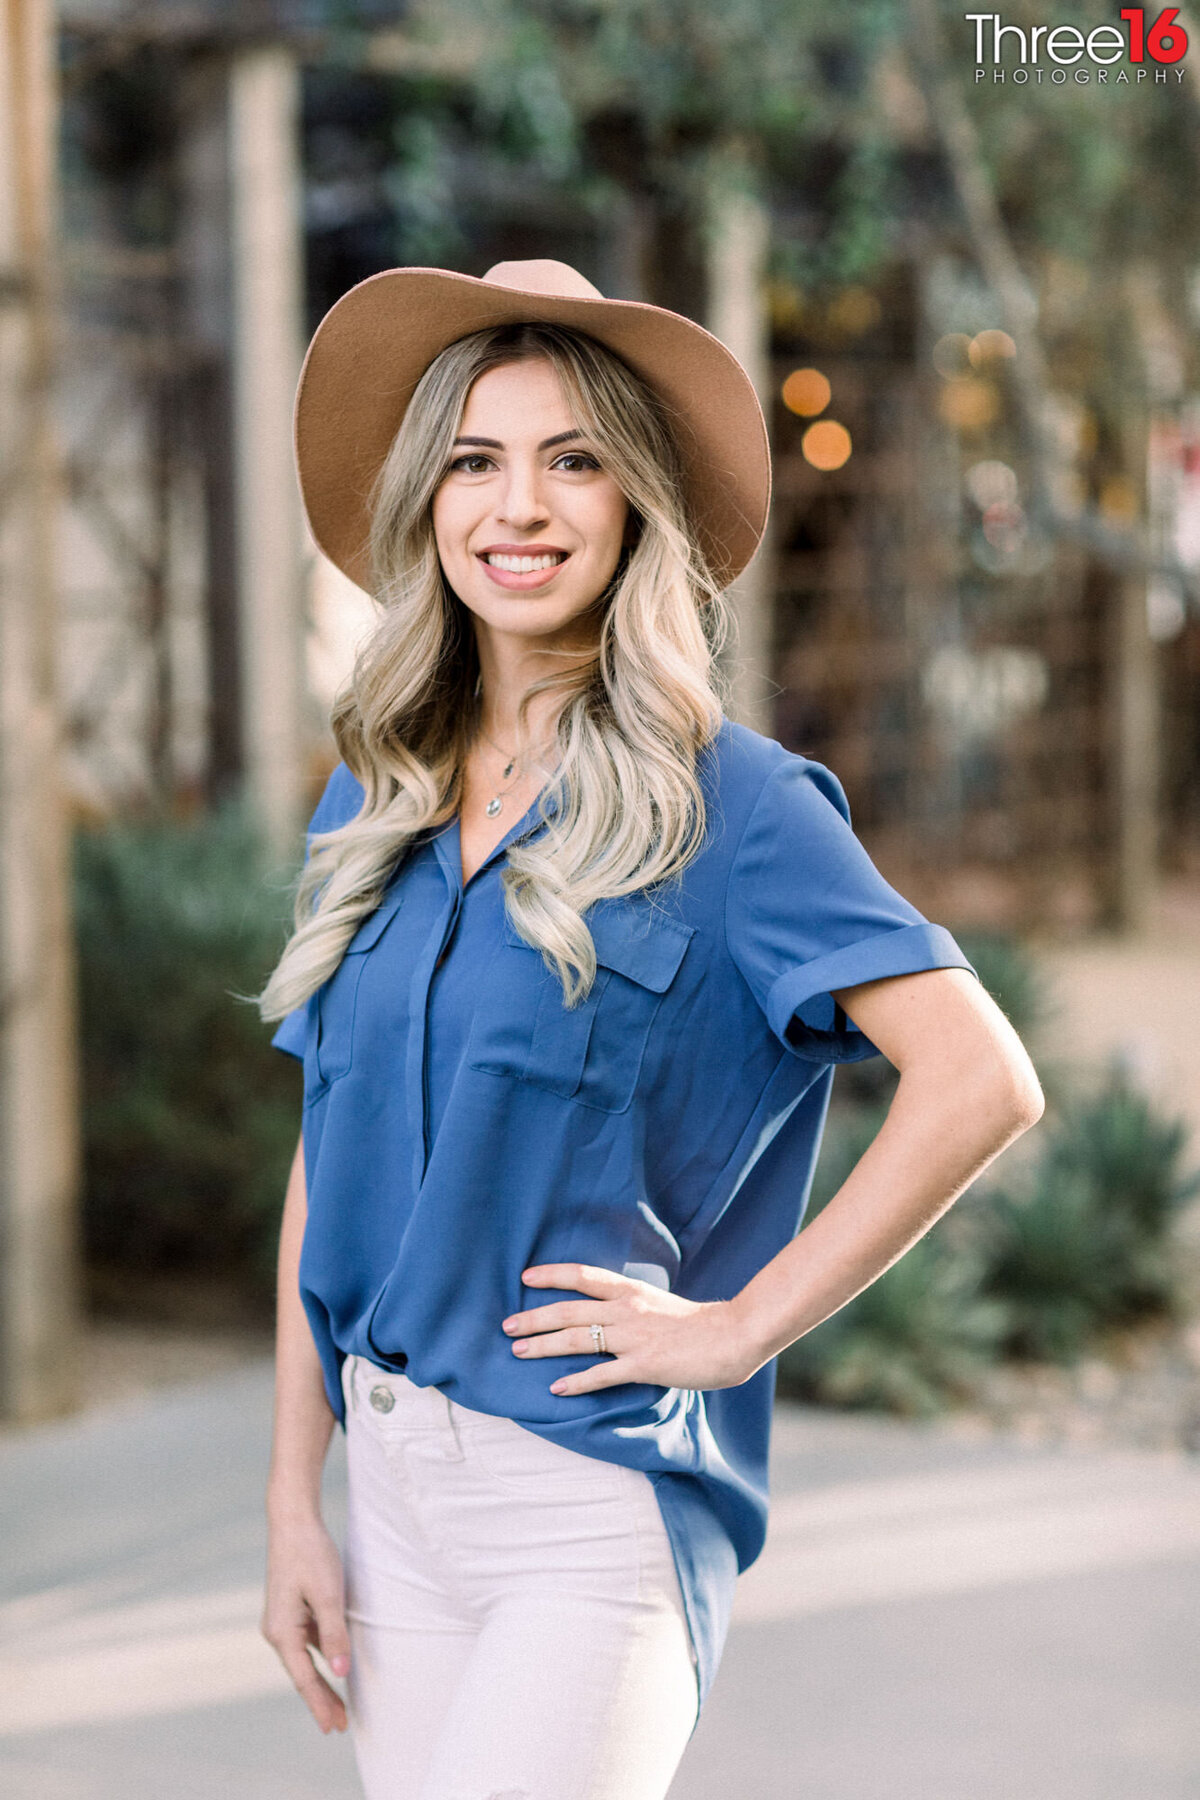 Smiling woman wearing a hat poses for headshots